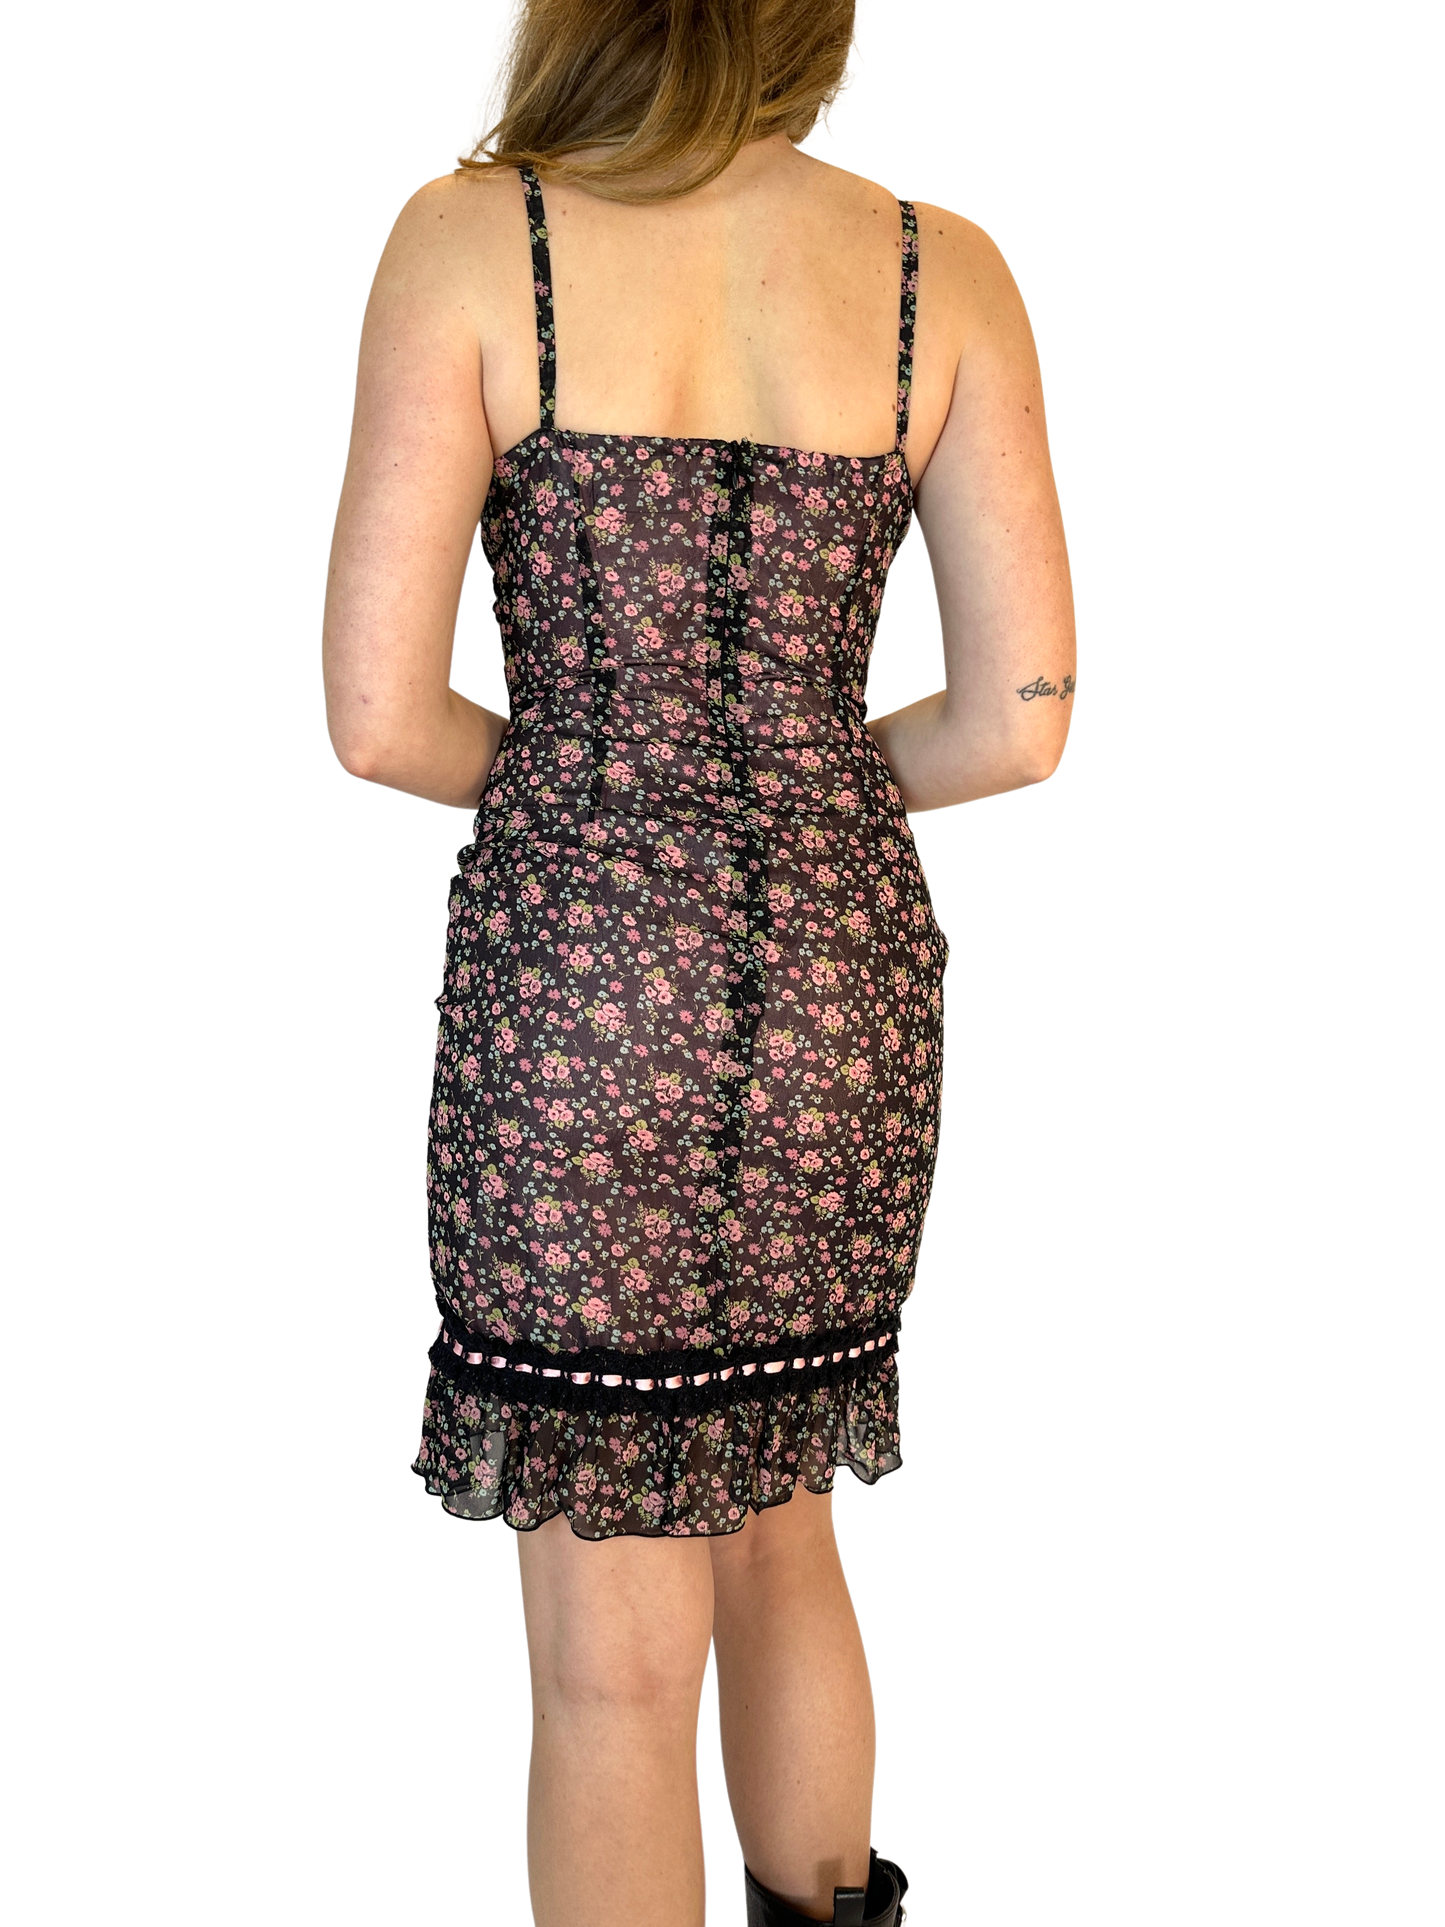 Black And Pink Cecil McGee Floral Dress